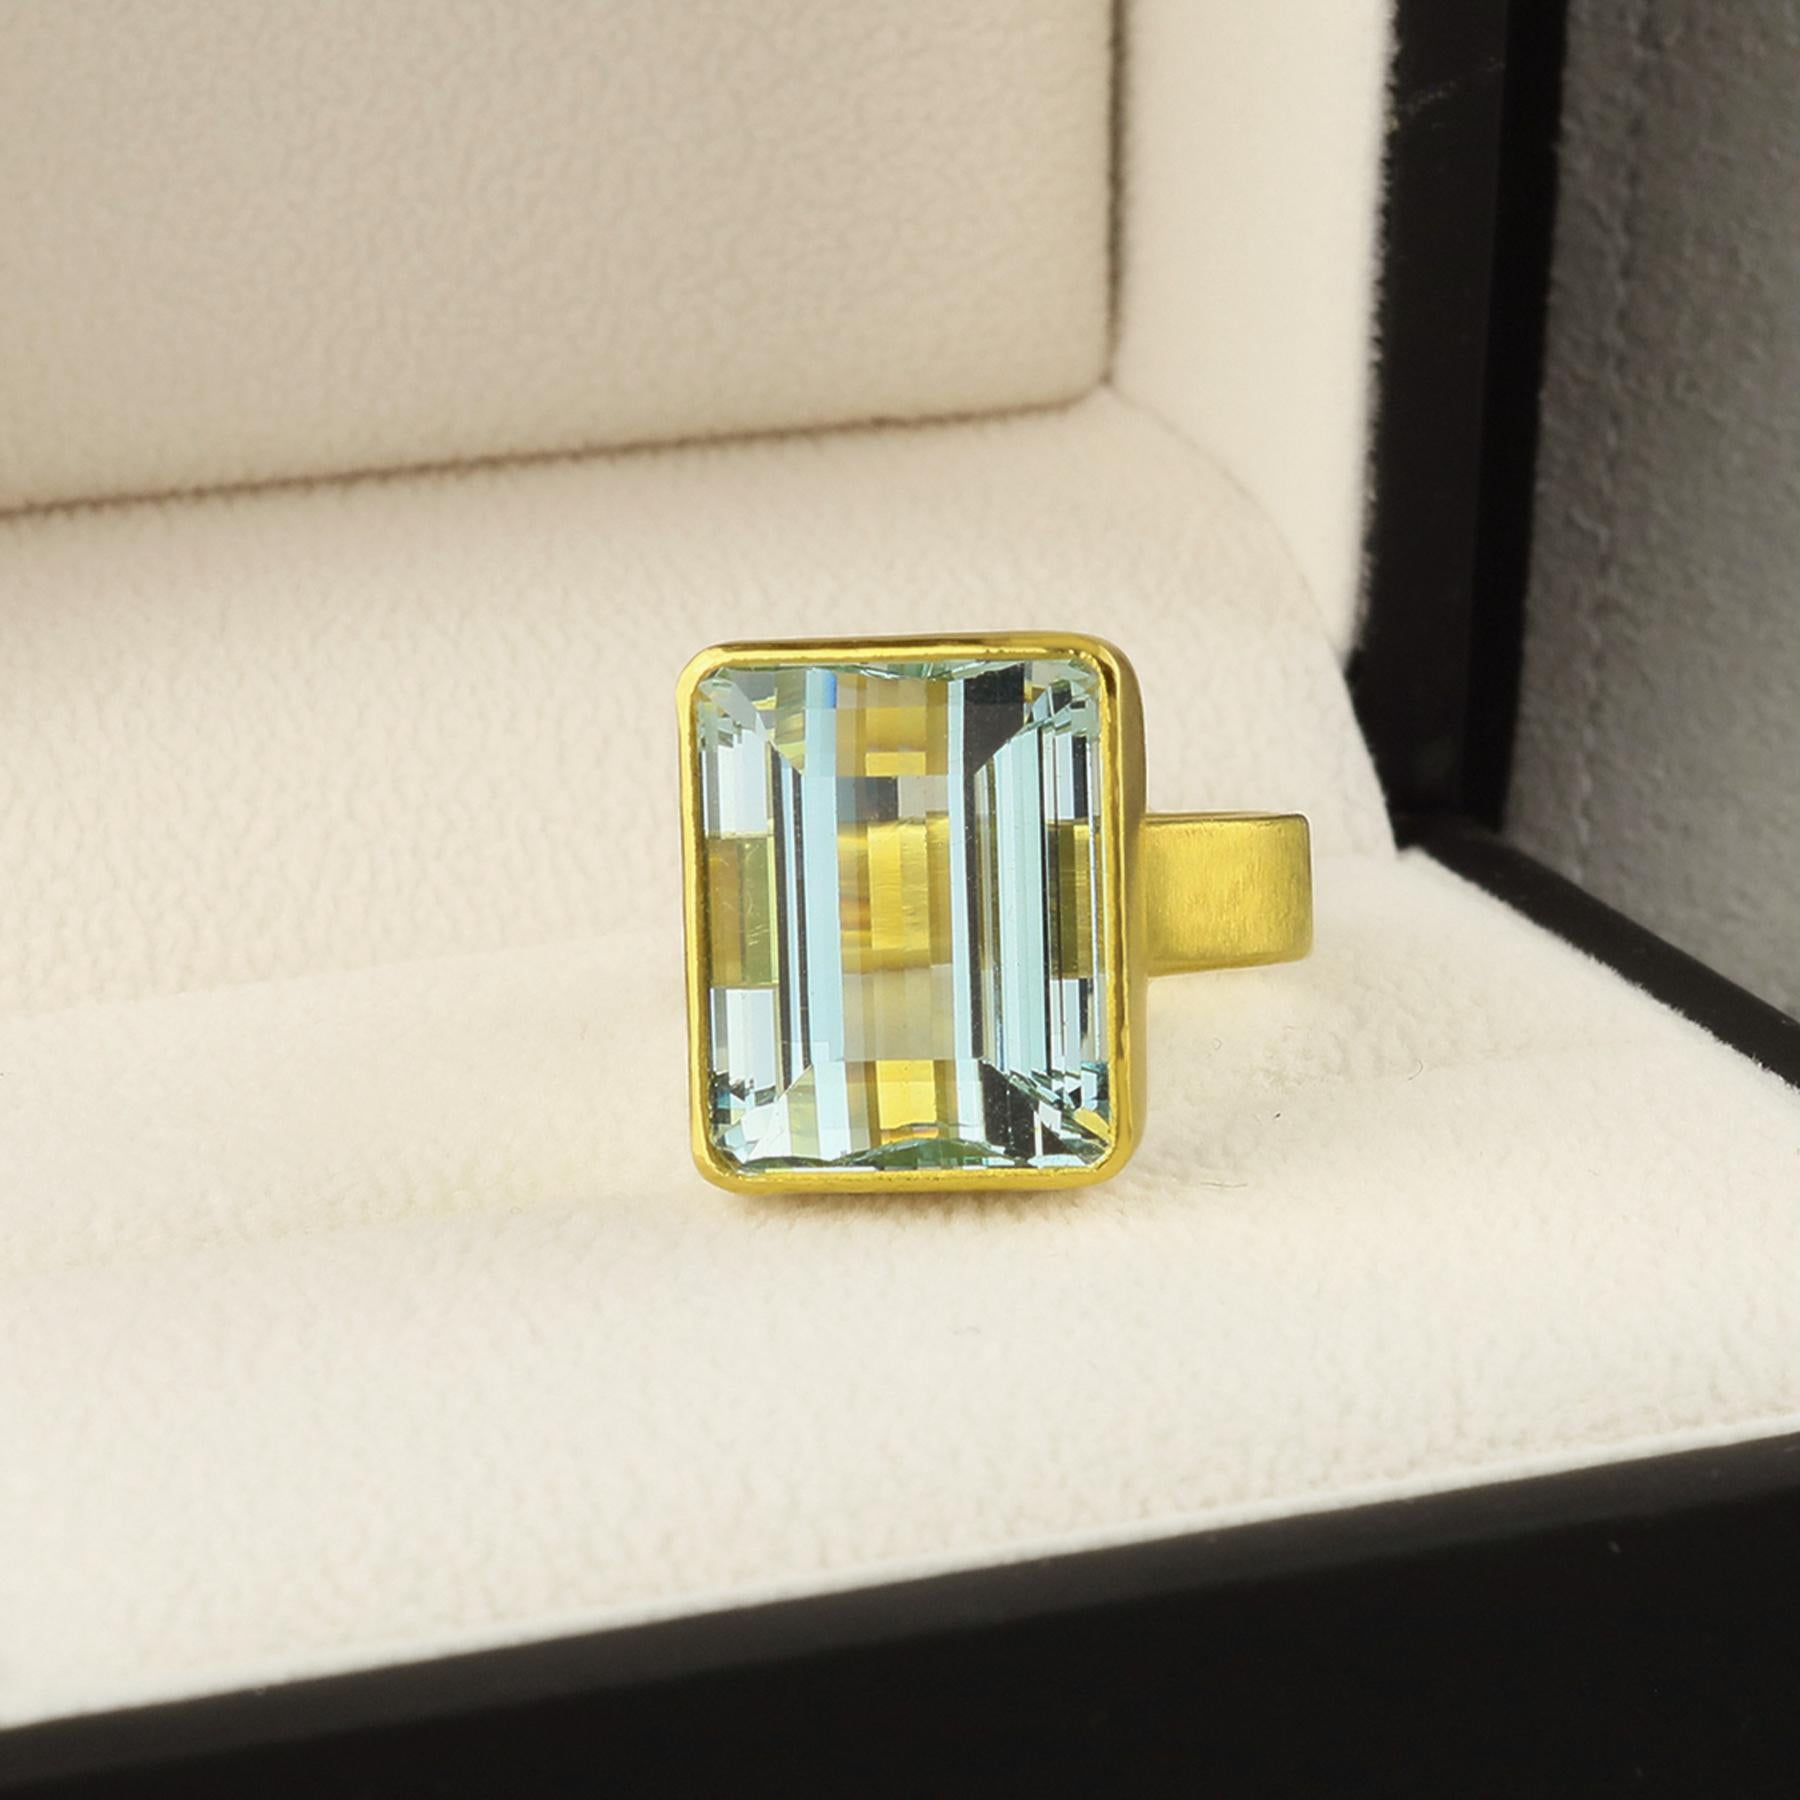 PHILIPPE SPENCER - Solid 20K Gold Completely Hand -Forged One-Of-A-Kind Wide-Band Statement Ring with 20.4 Ct. Extra-Fine Emerald Cut Aquamarine set in backless 22K Gold Setting. Heavy Matte Brushed Finish. The size is 7 3/4 to 8, and is in-stock